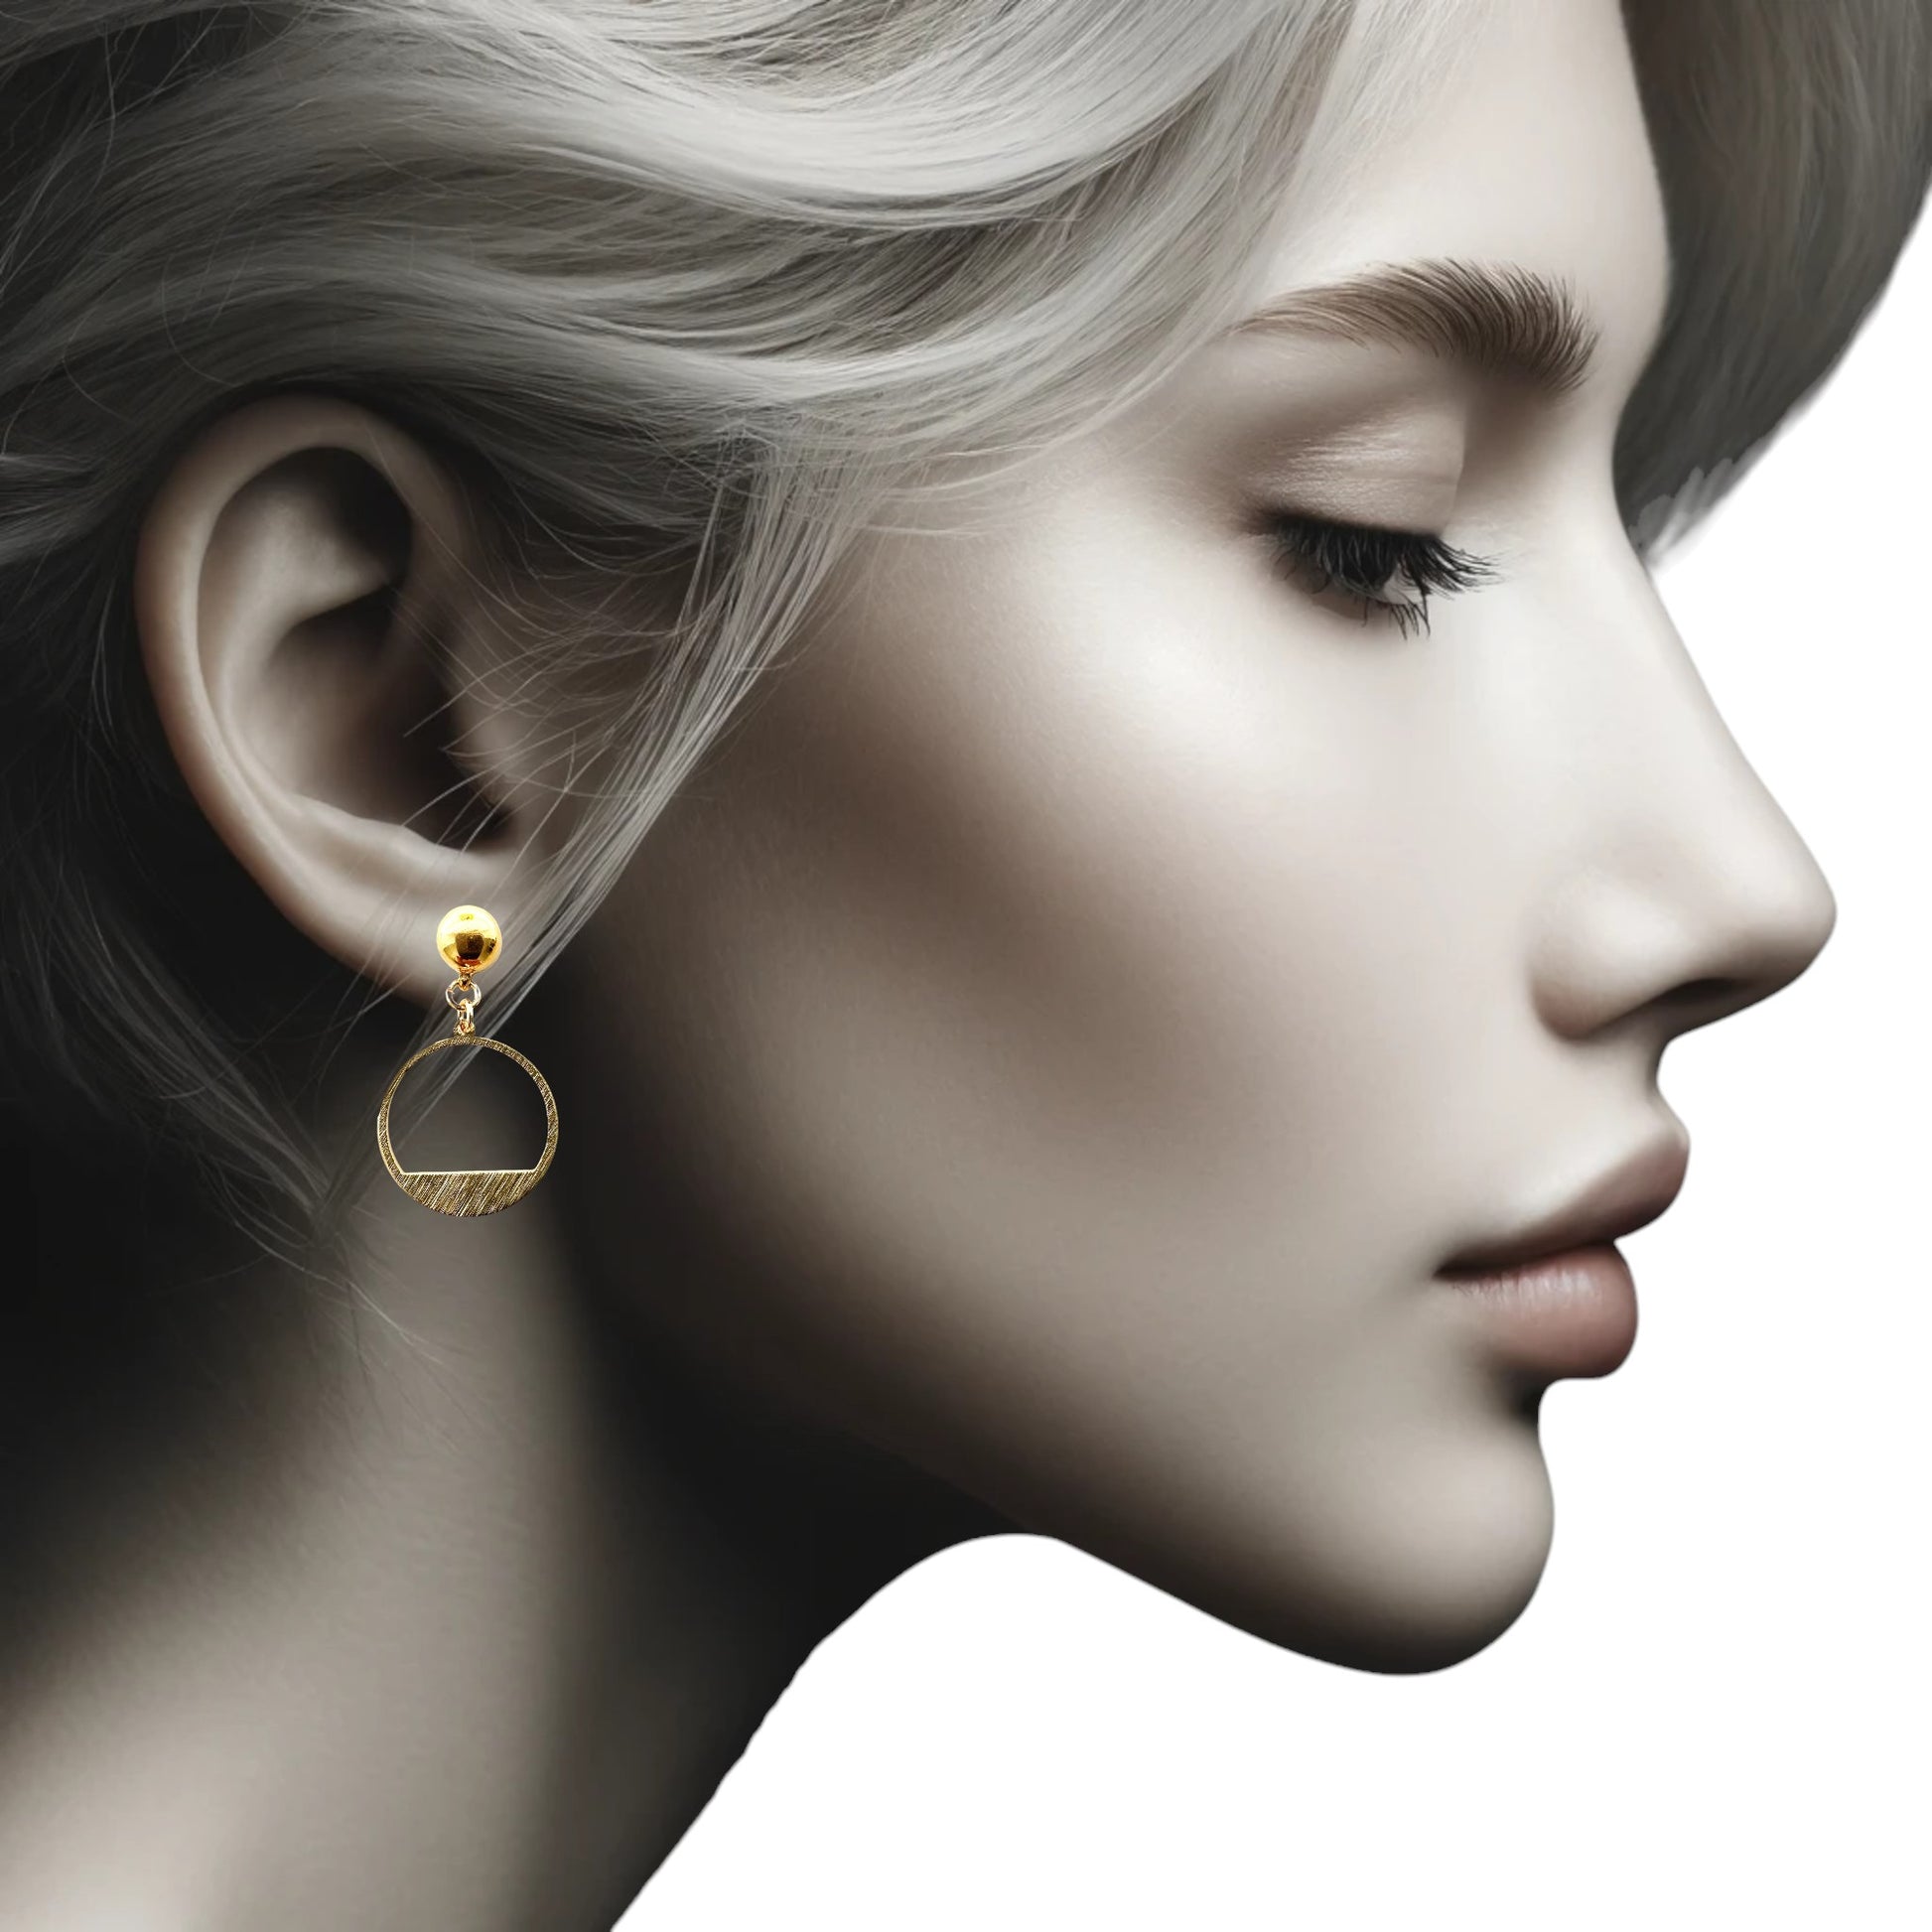 Ti-Go Golden rings earring. Detachable earrings for a truly hypoallergenic jewellery on a white young woman.